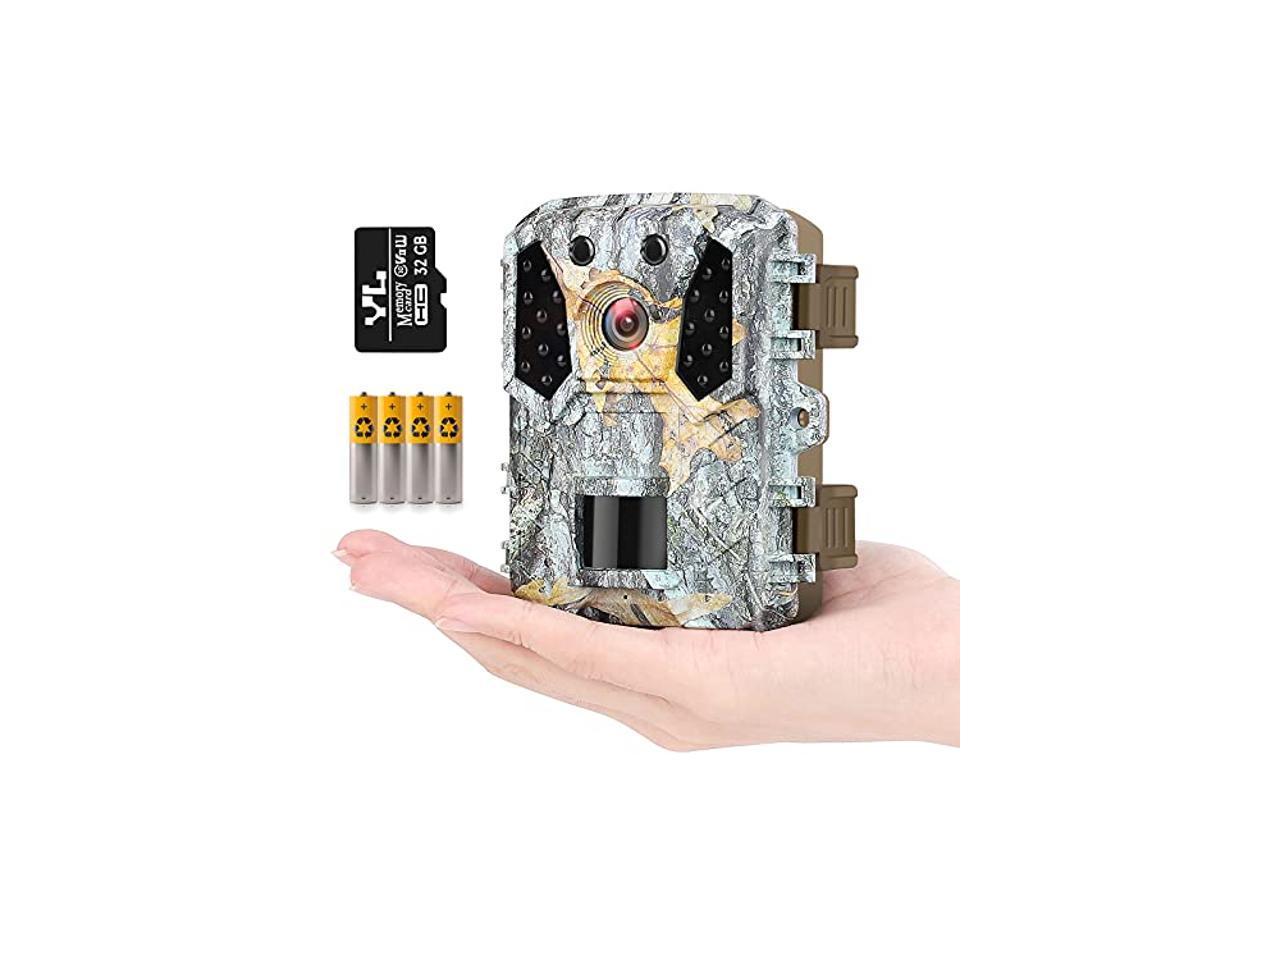 HAWKRAY Mini Trail Game Camera-M2 20MP 1080P，Free 32G mrico SD Card and 4AA Batteries,Game Camera Infrared Sensors 120° Low Glow IR Night Vision Motion Activated,2 LCD,IP65 Waterproof 